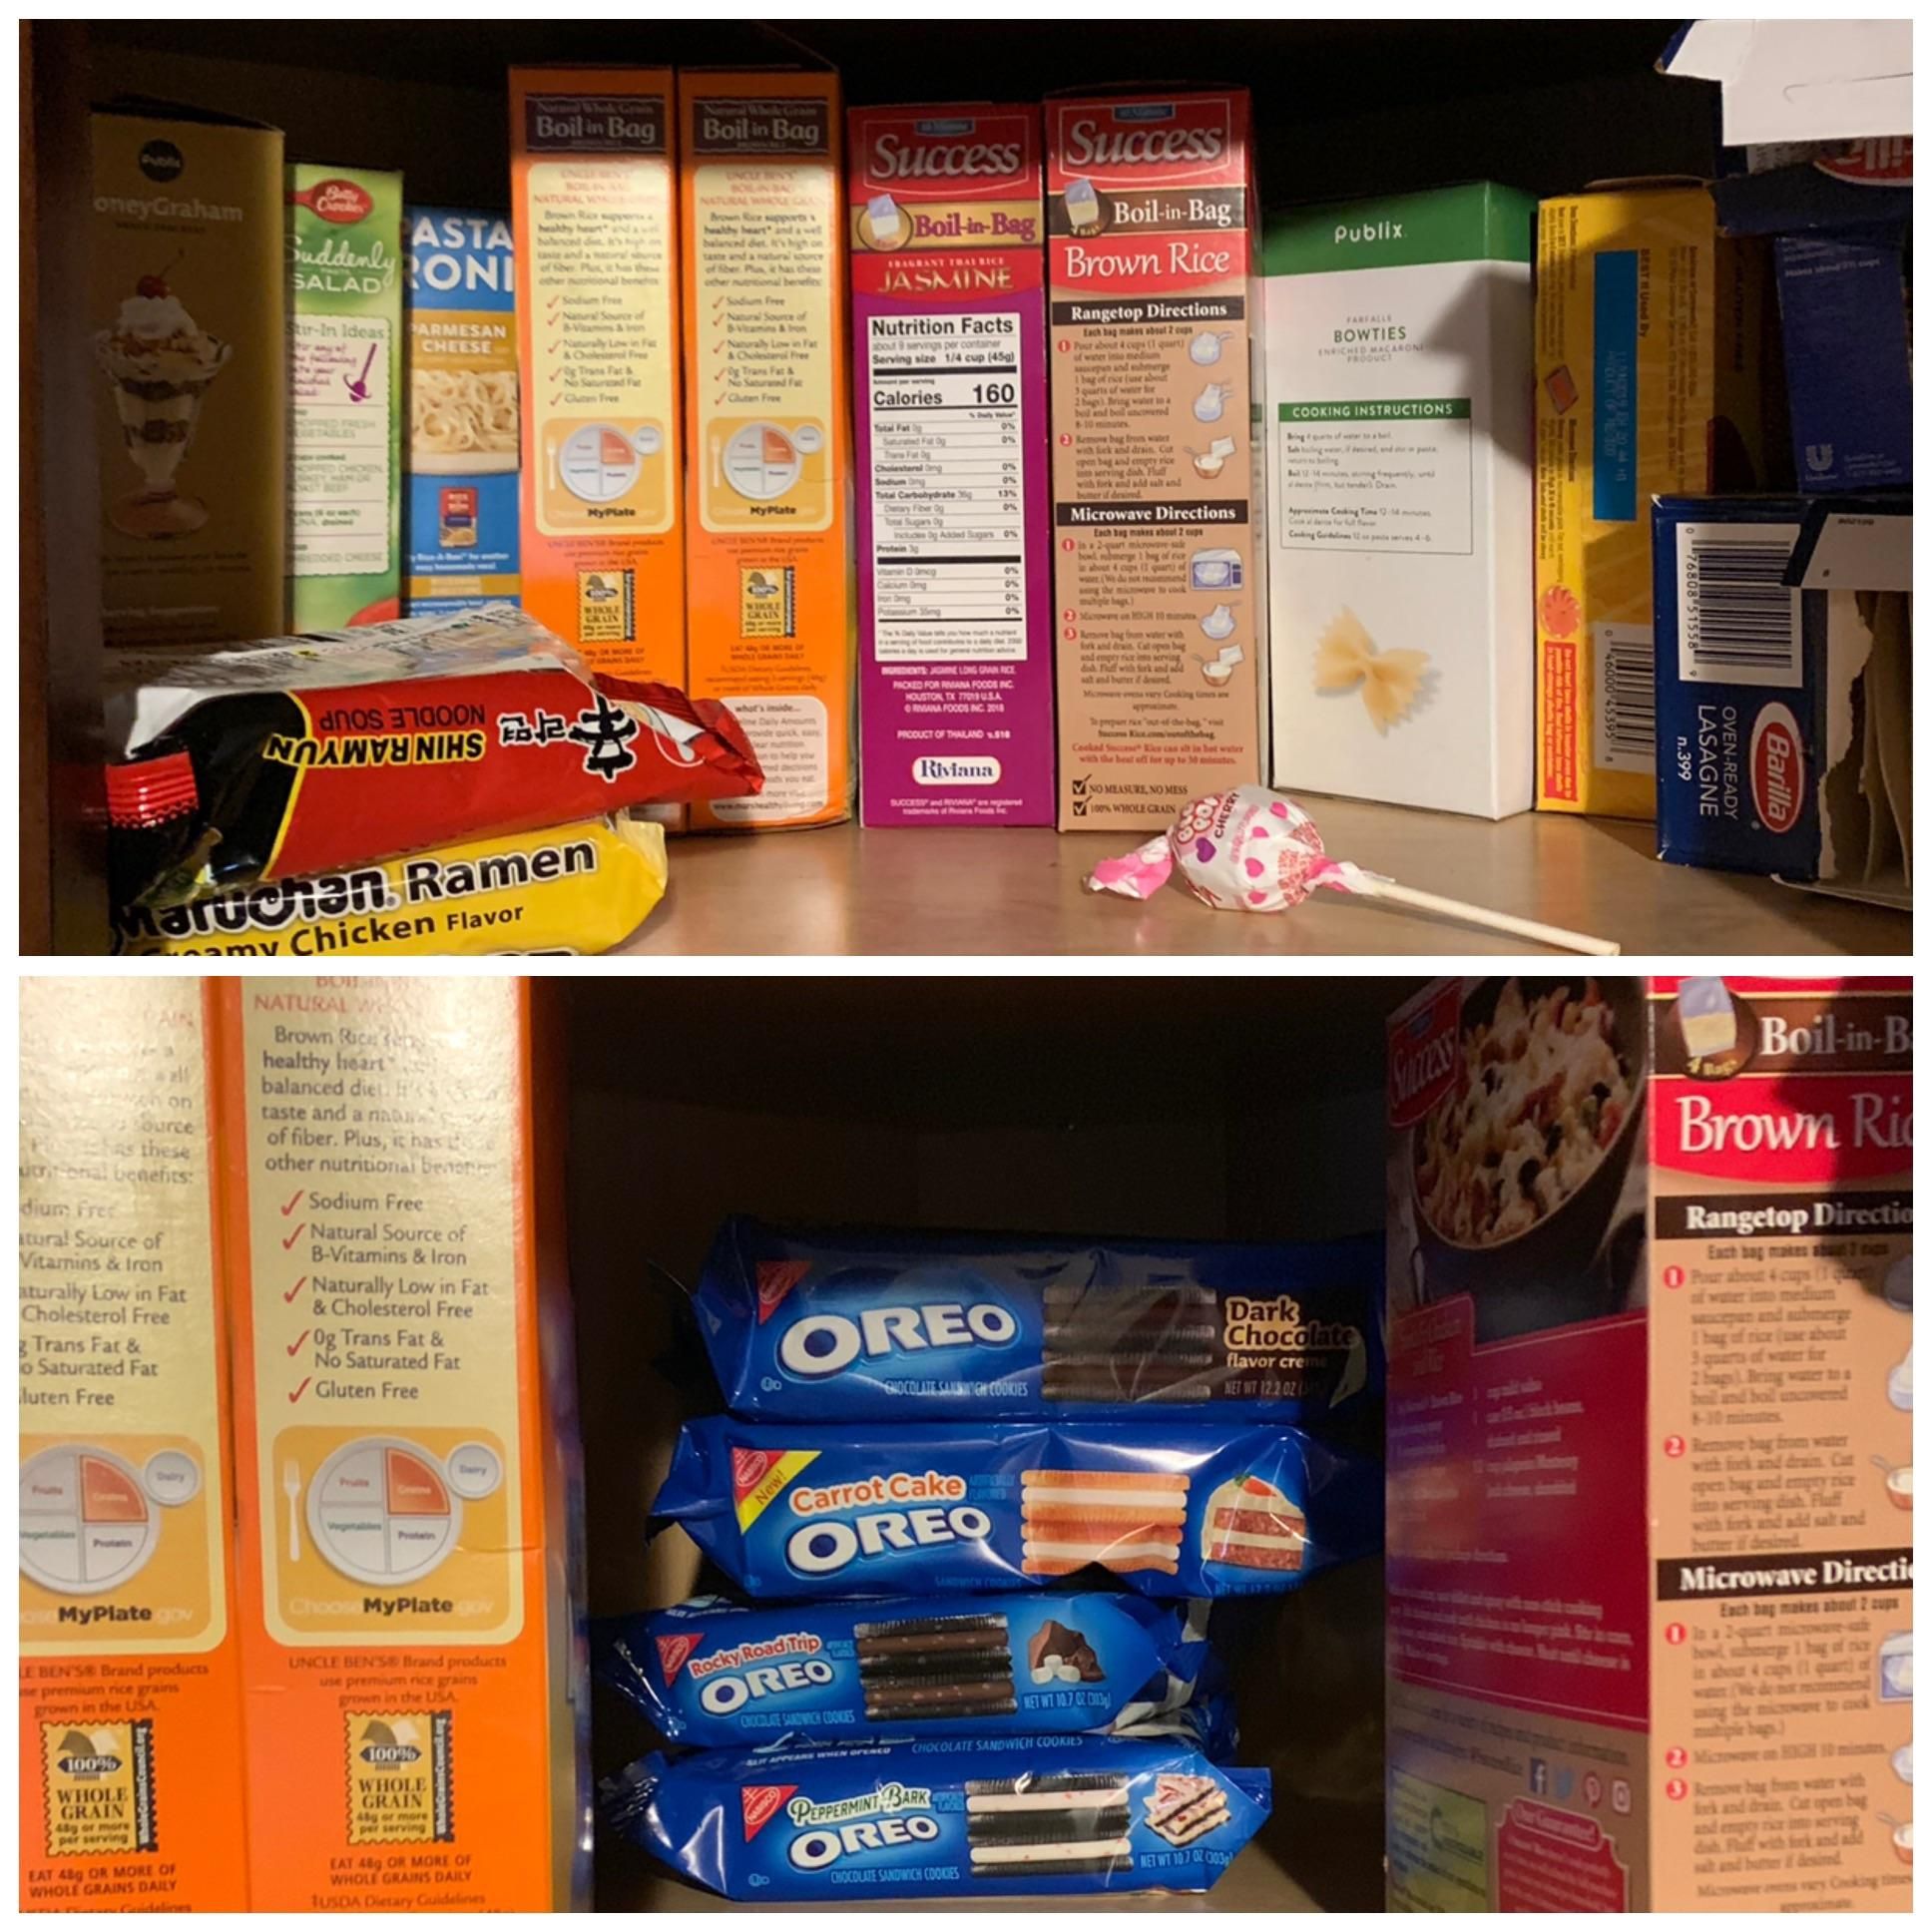 I was cleaning out old food from our cabinets today and found my wife’s secret Oreo stash .